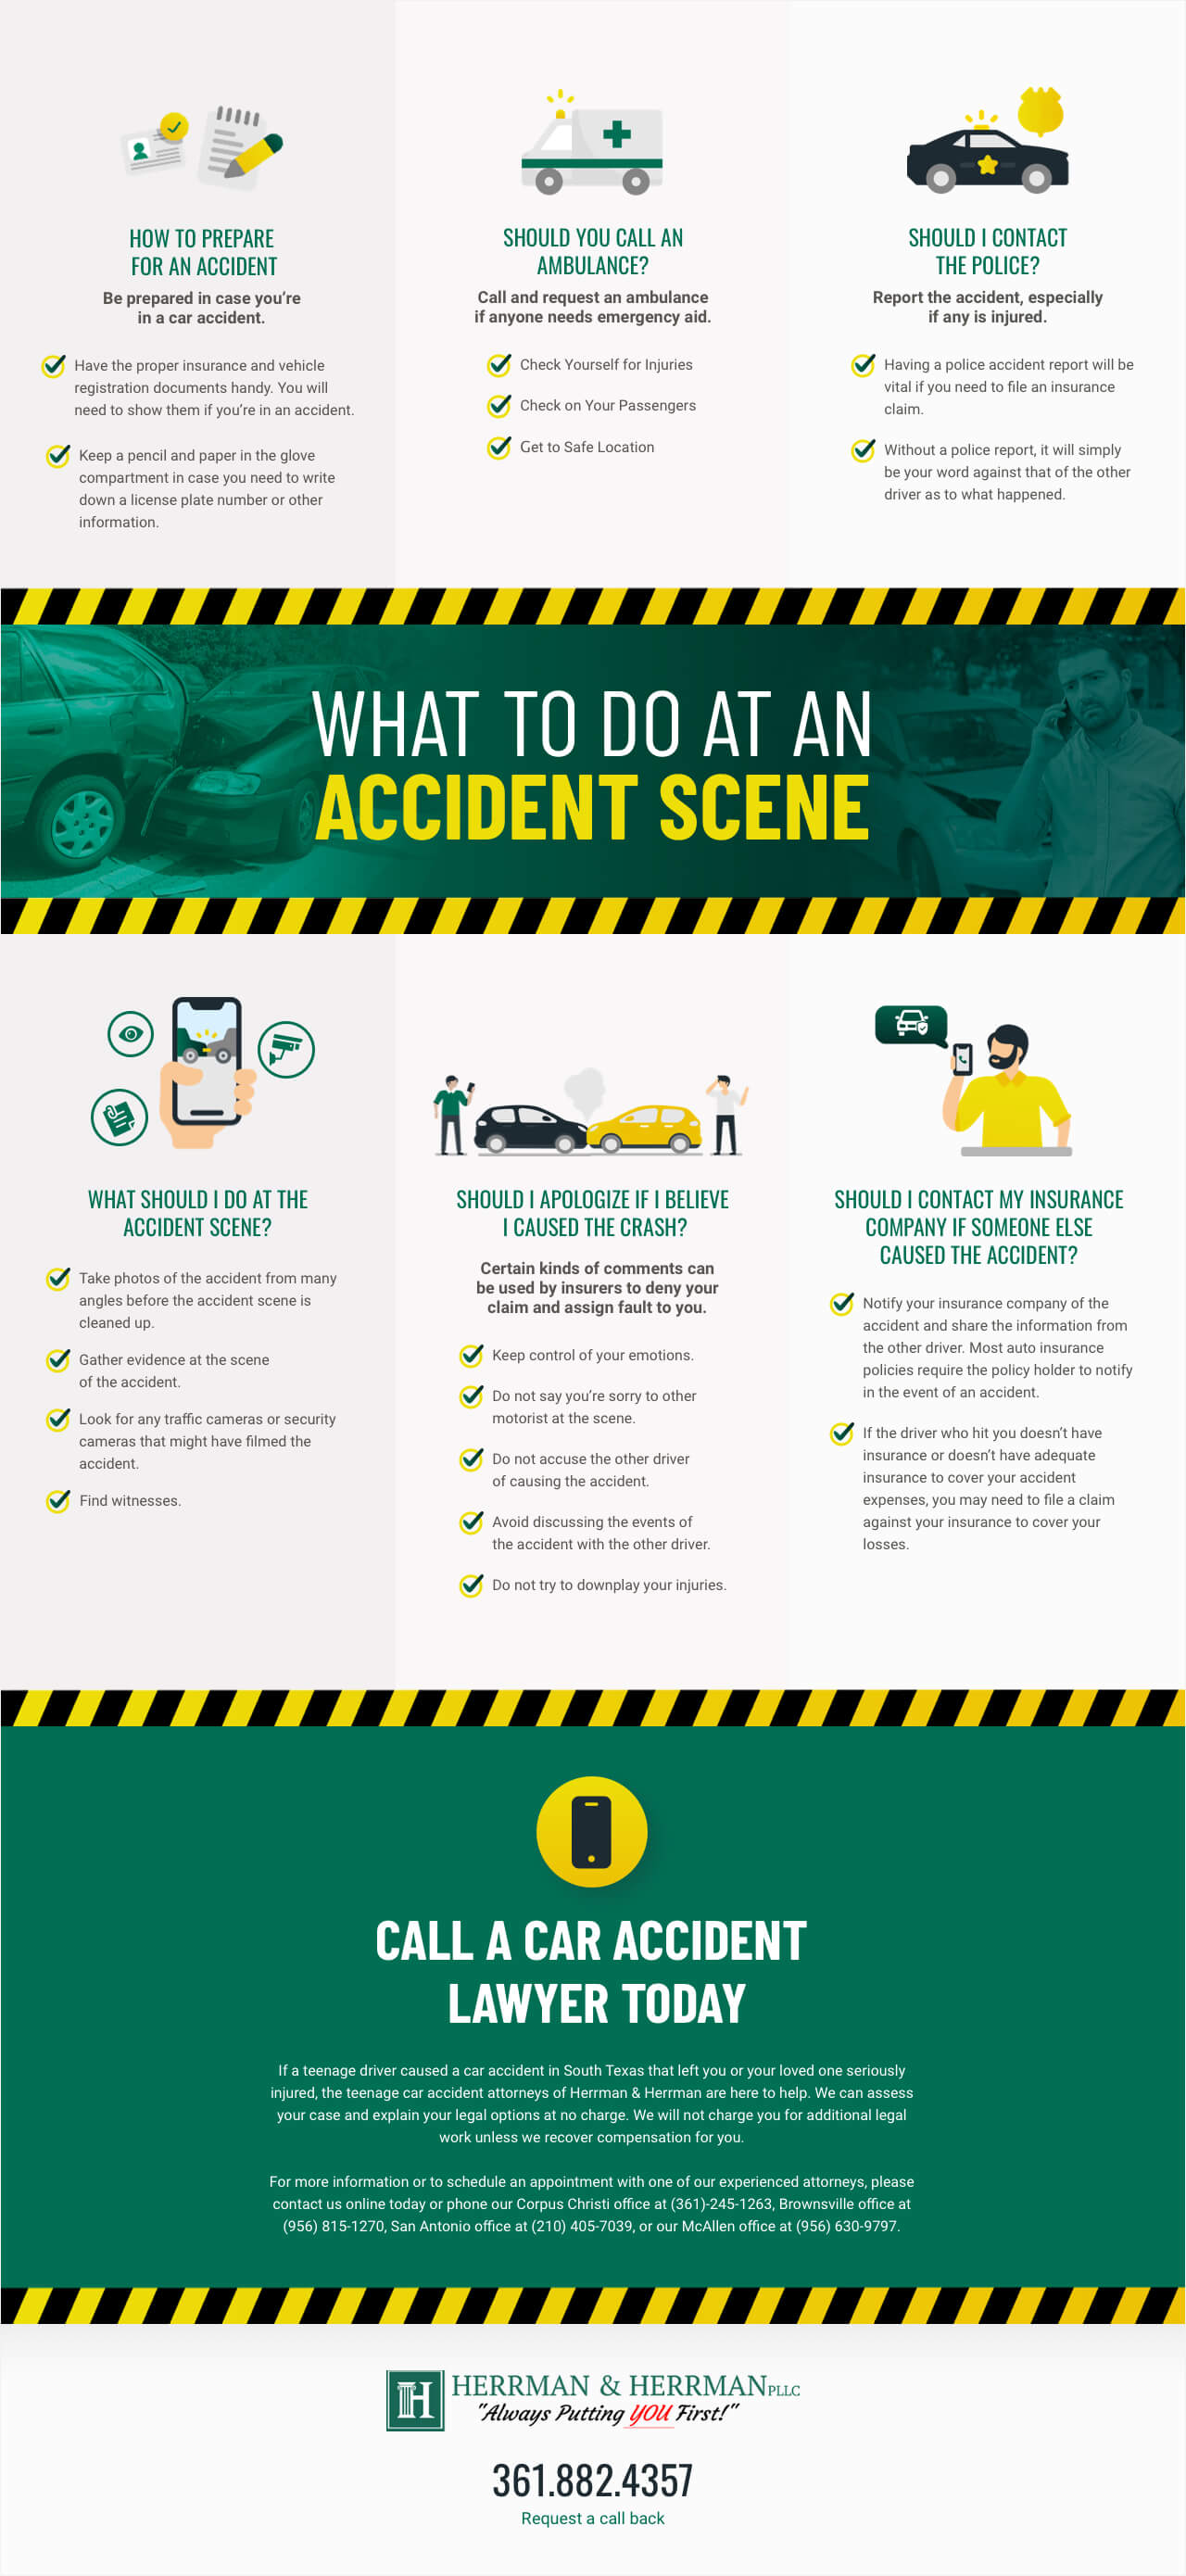 What to do at an accident scene